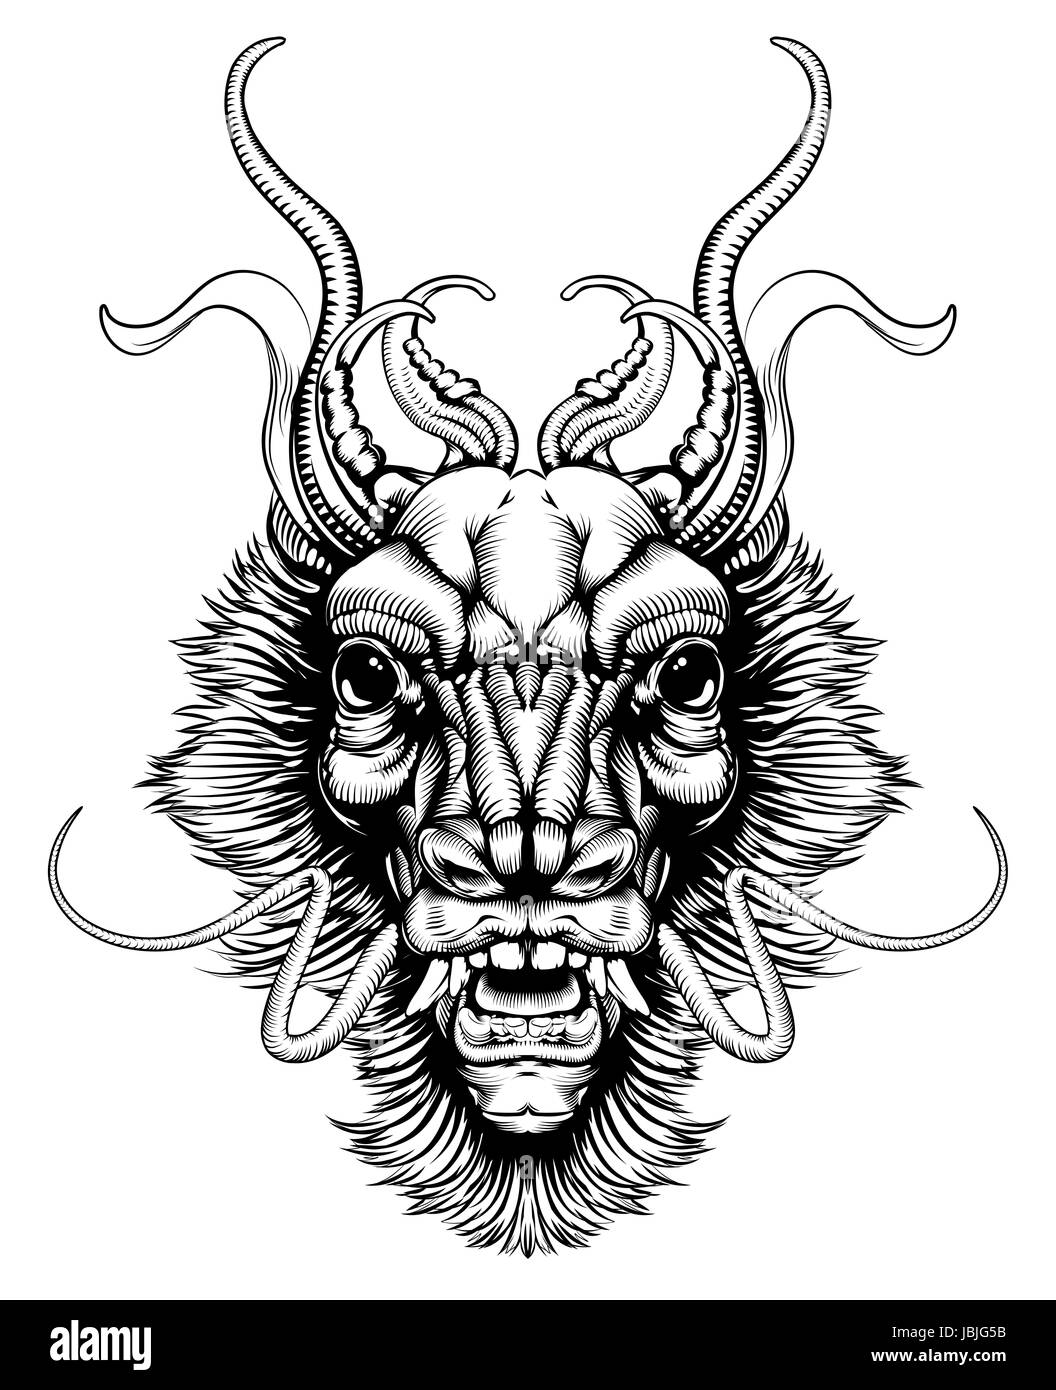 An original illustration of a dragon or monster head in a dynamic woodblock style Stock Photo